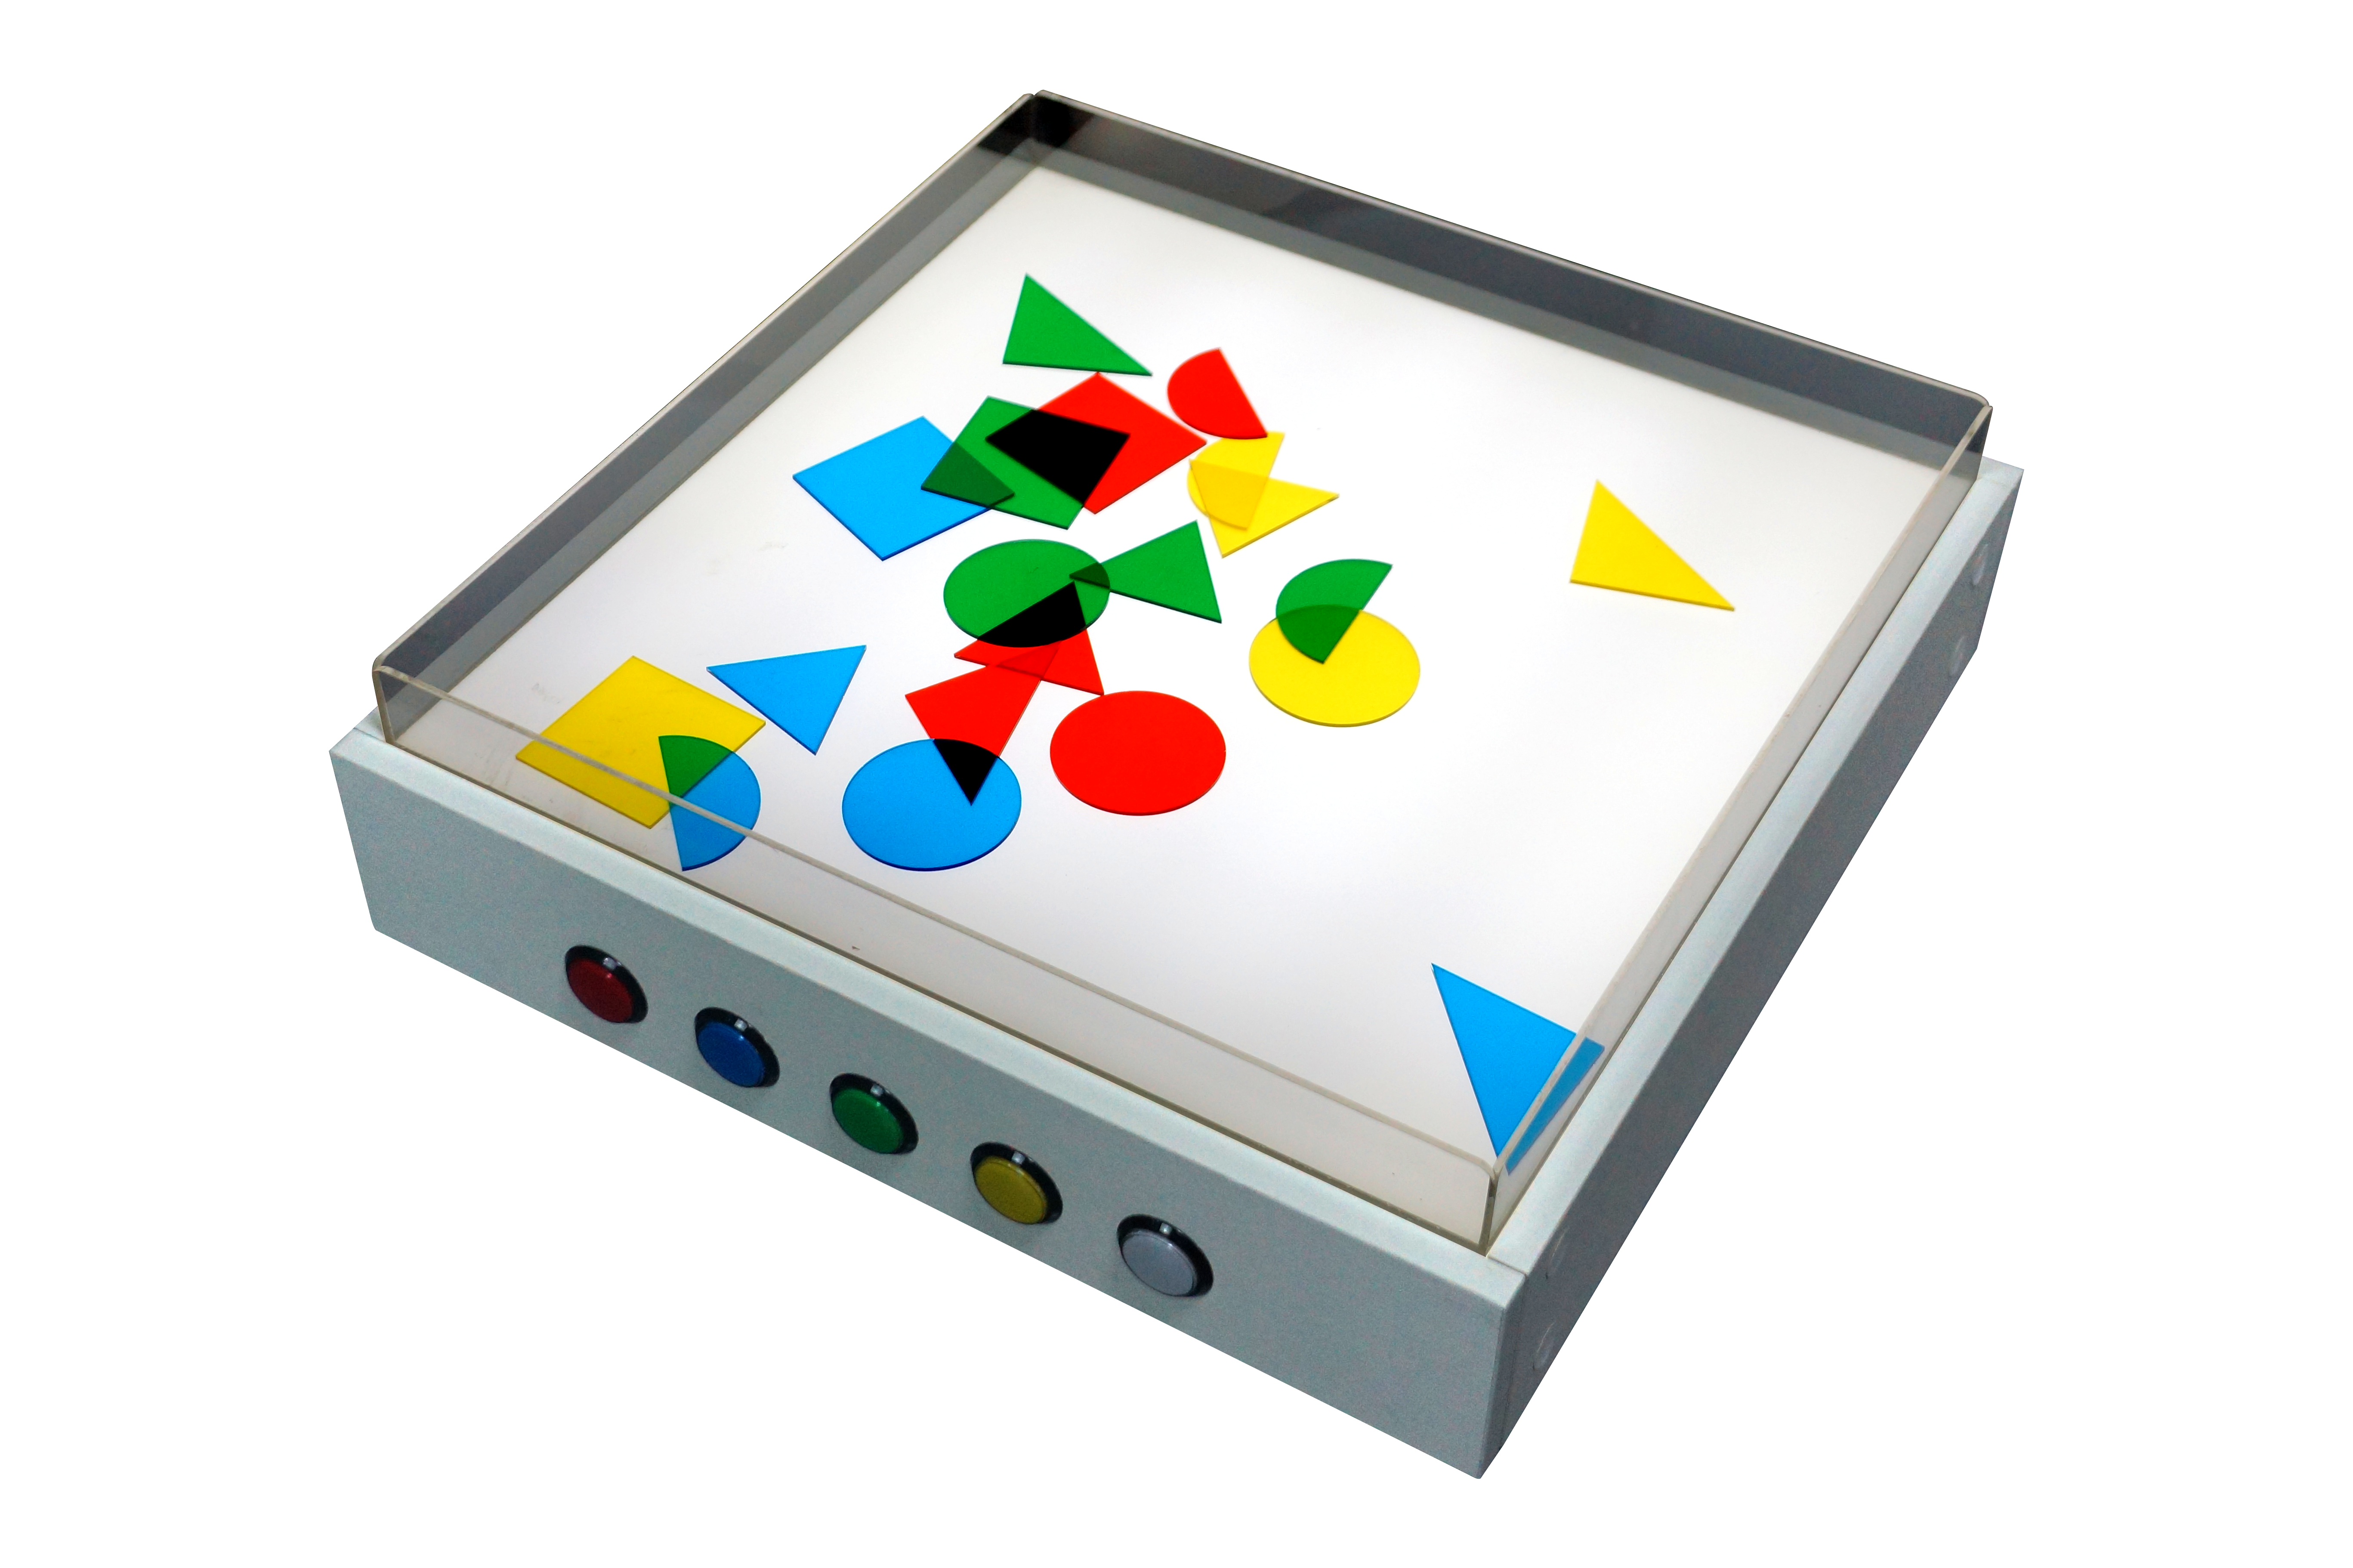 Light Table with Sand Table Top